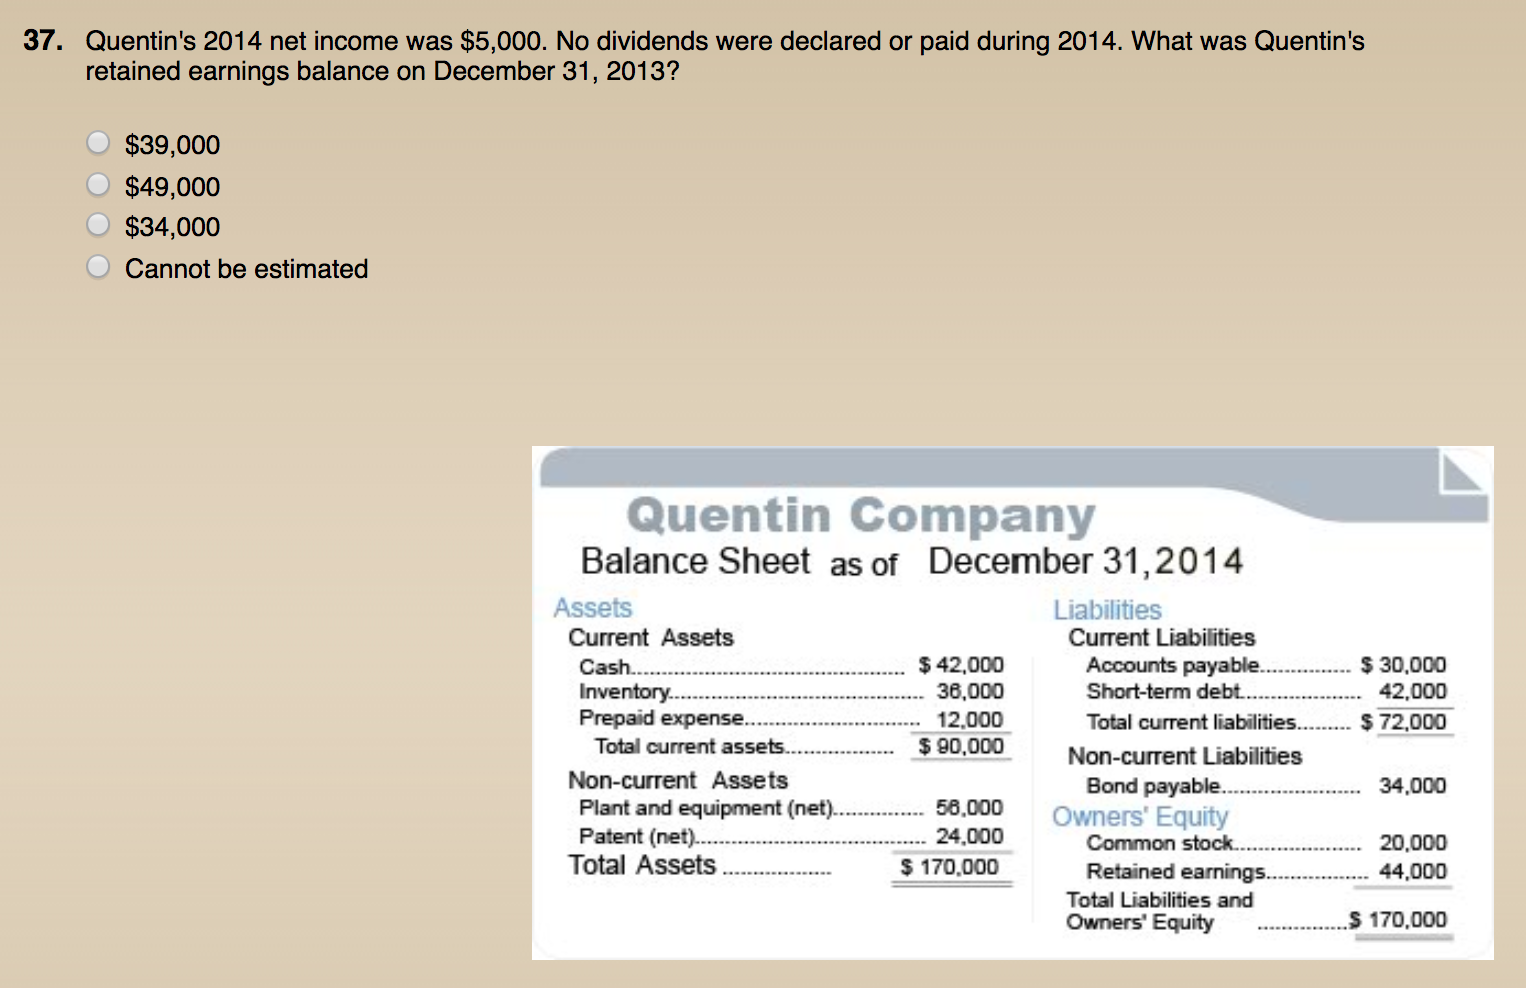 37. Quentins 2014 net income was $5,000. No dividends were declared or paid during 2014. What was Quentins retained earning